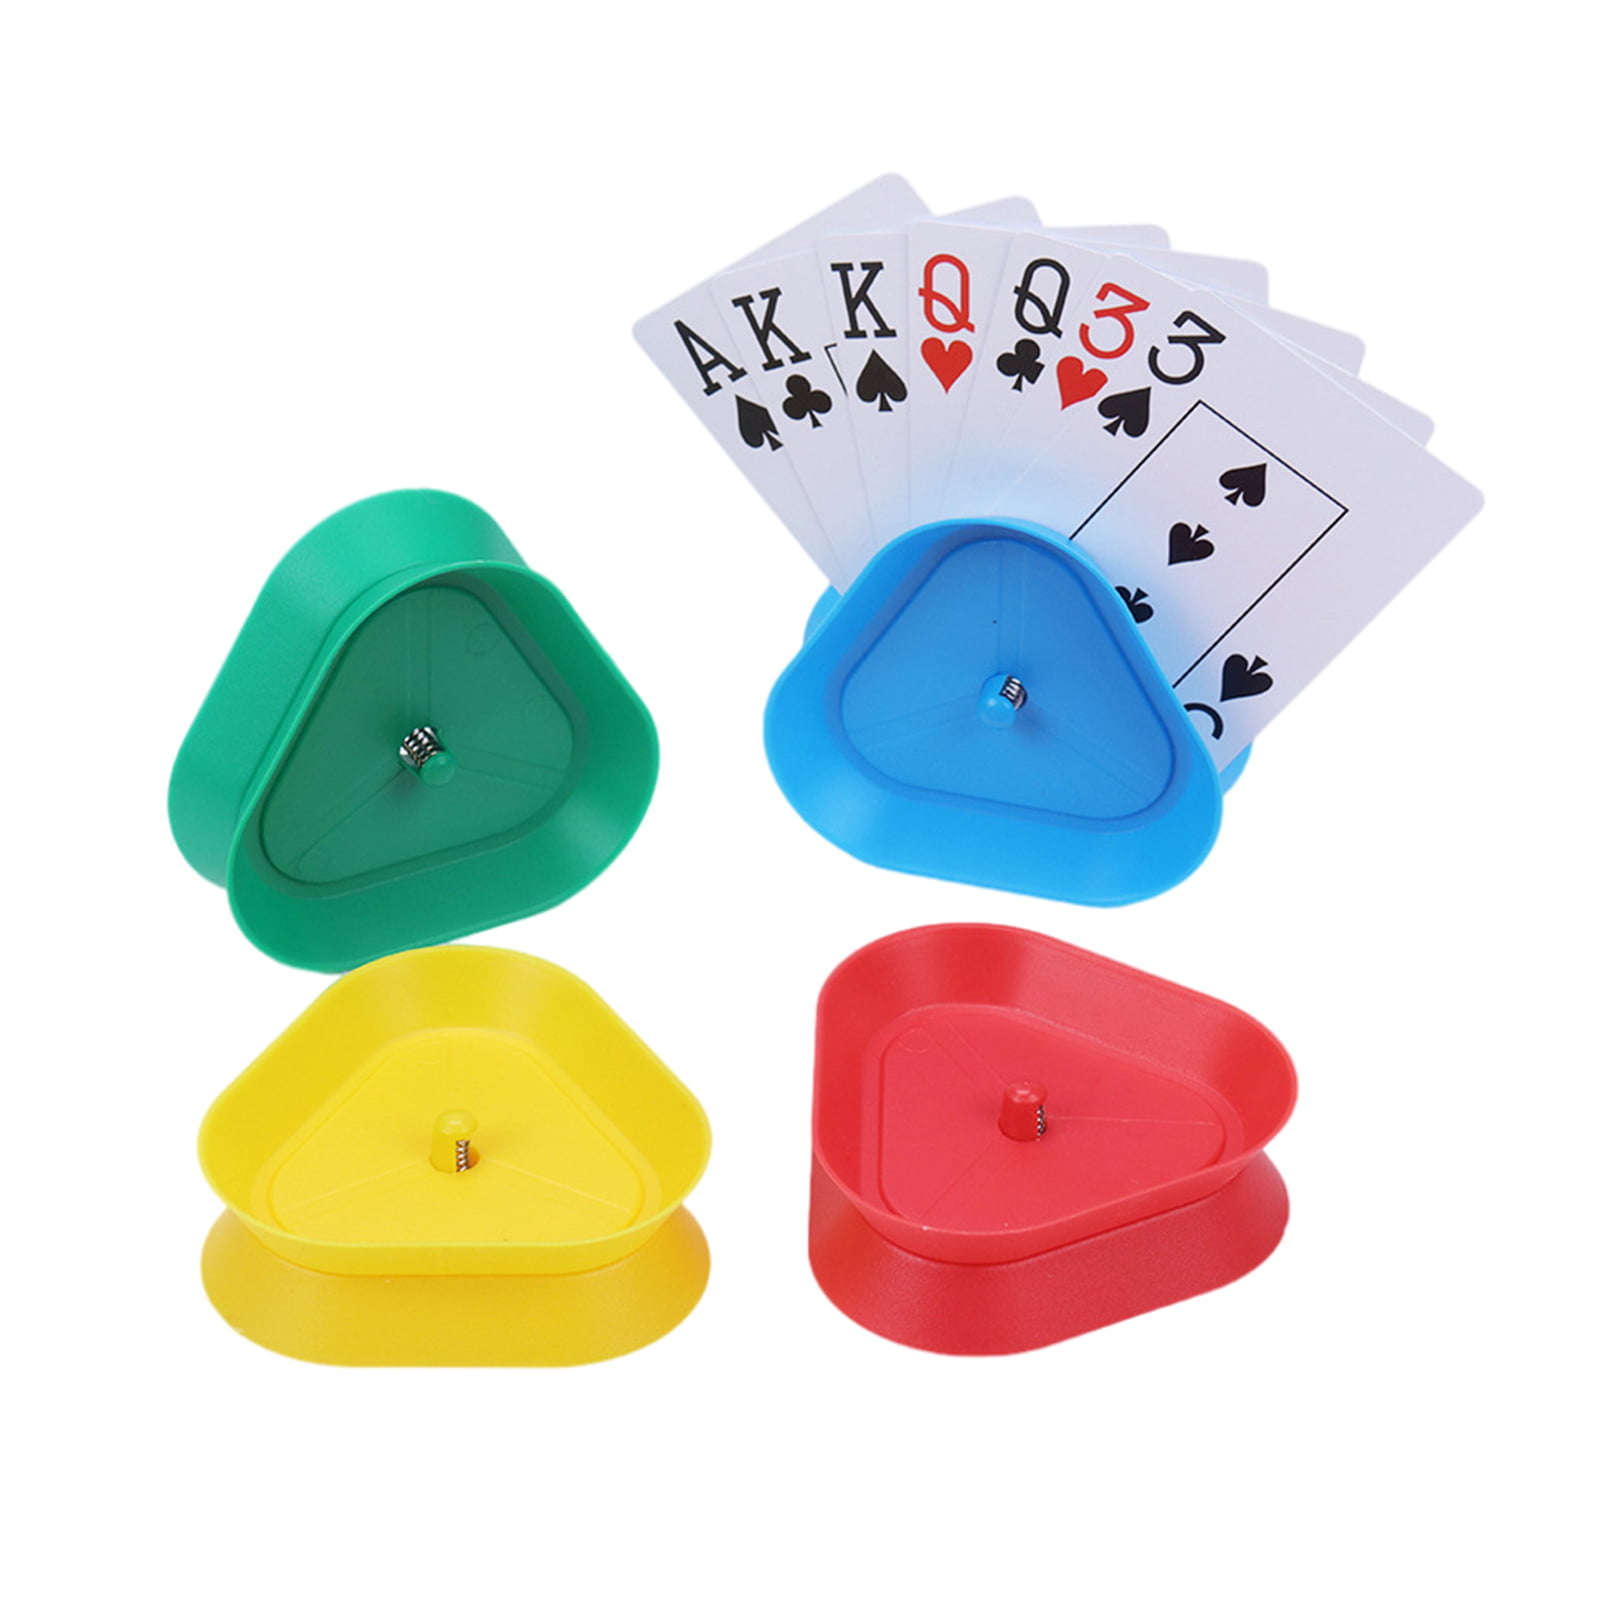 4 Pieces Handsfree Playing Card Holder Rack for Picnic Party Adults Disabled 